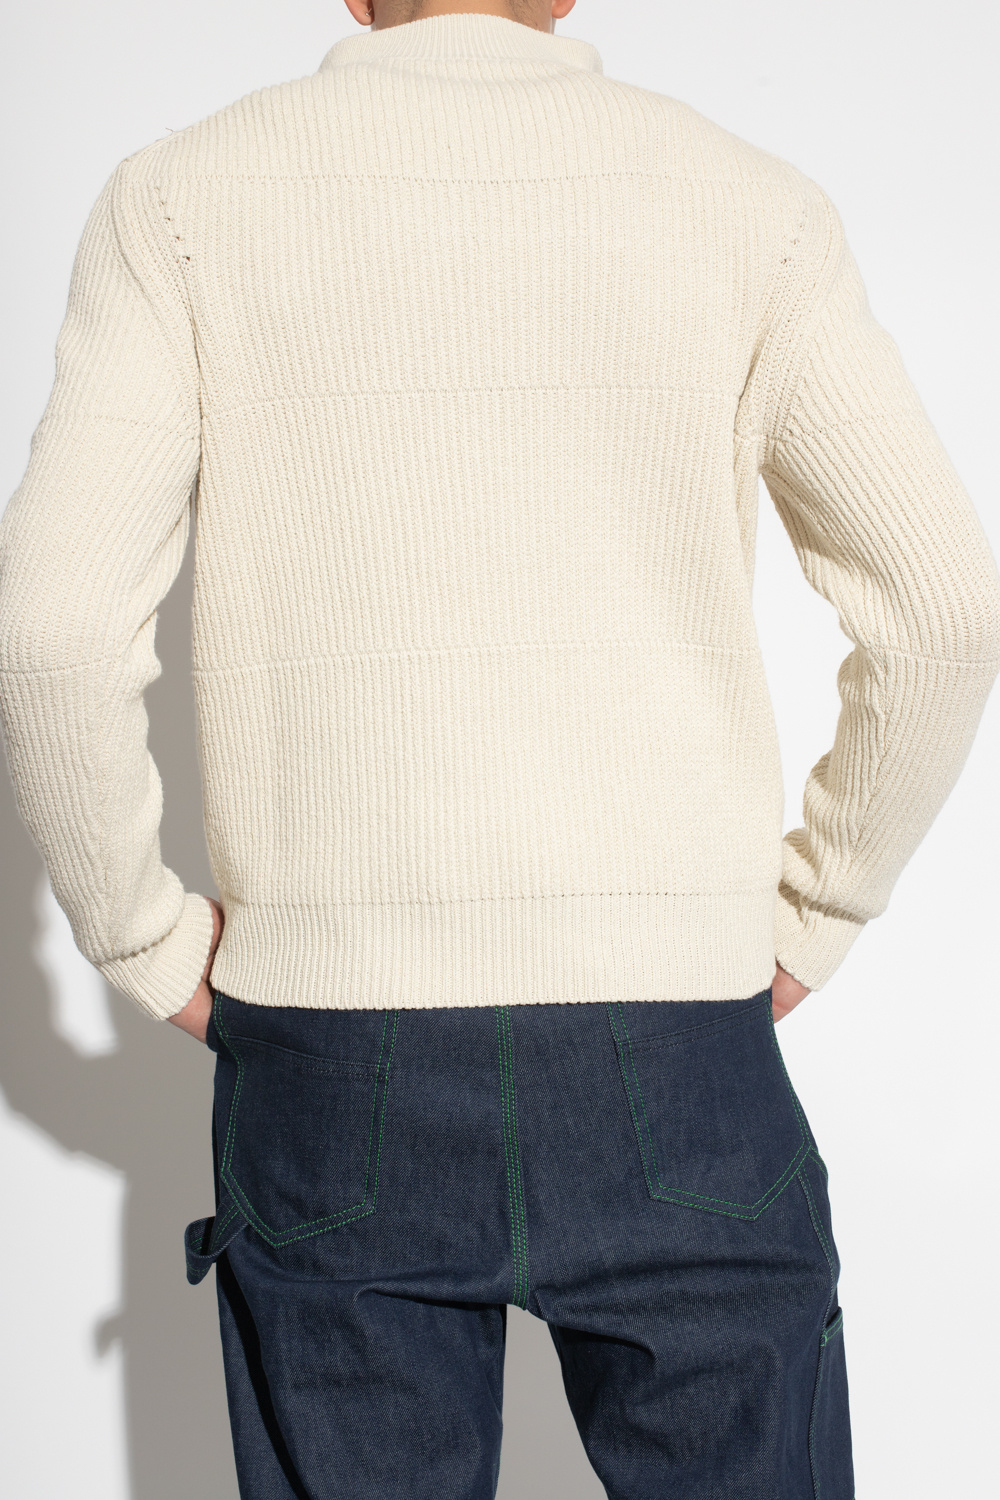 Jacquemus ‘Doce’ sweater Strass with standing collar